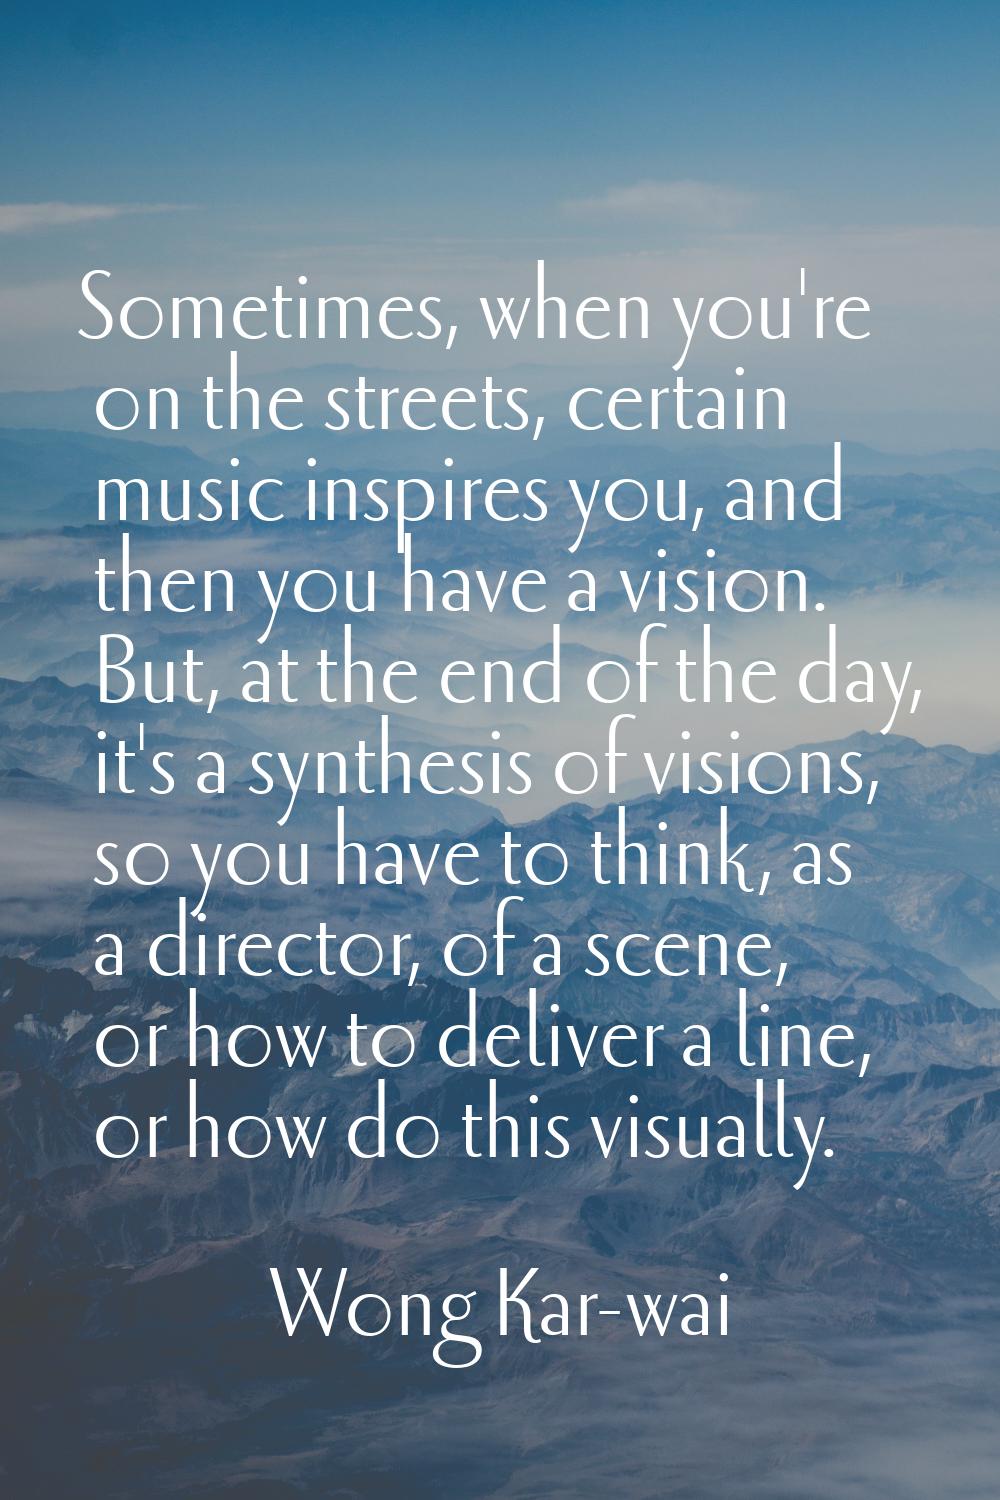 Sometimes, when you're on the streets, certain music inspires you, and then you have a vision. But,